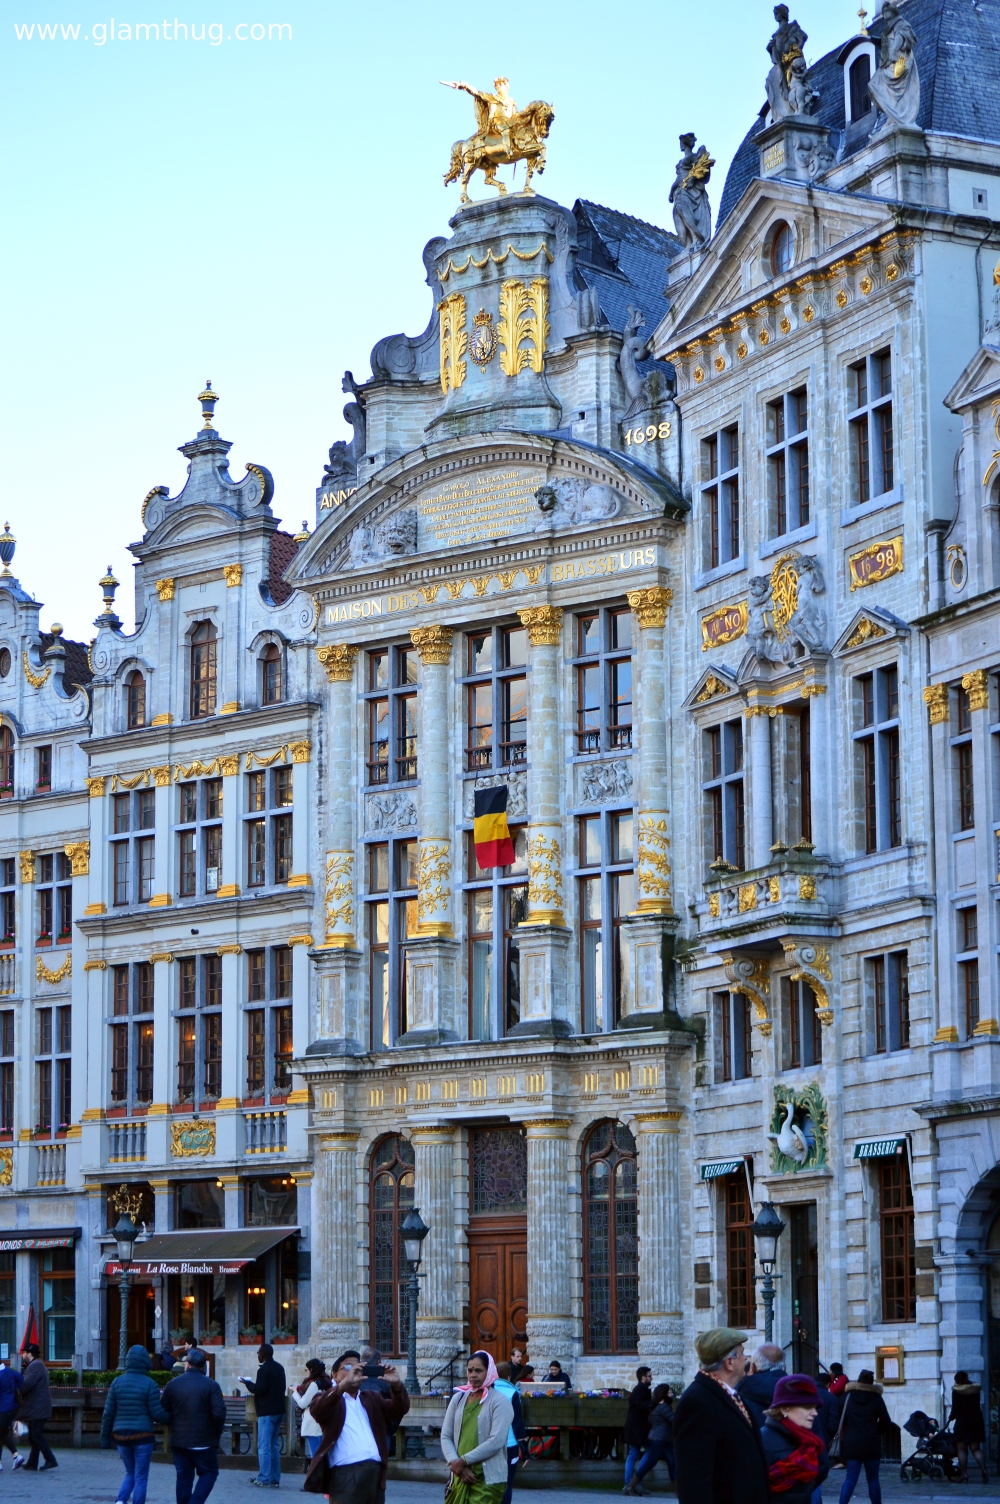 grand place brussels, best place in brussels, architecture in brussels, visit bruxelles, what to do in brussels,glamthug blog, 10 reasons to love Brussels